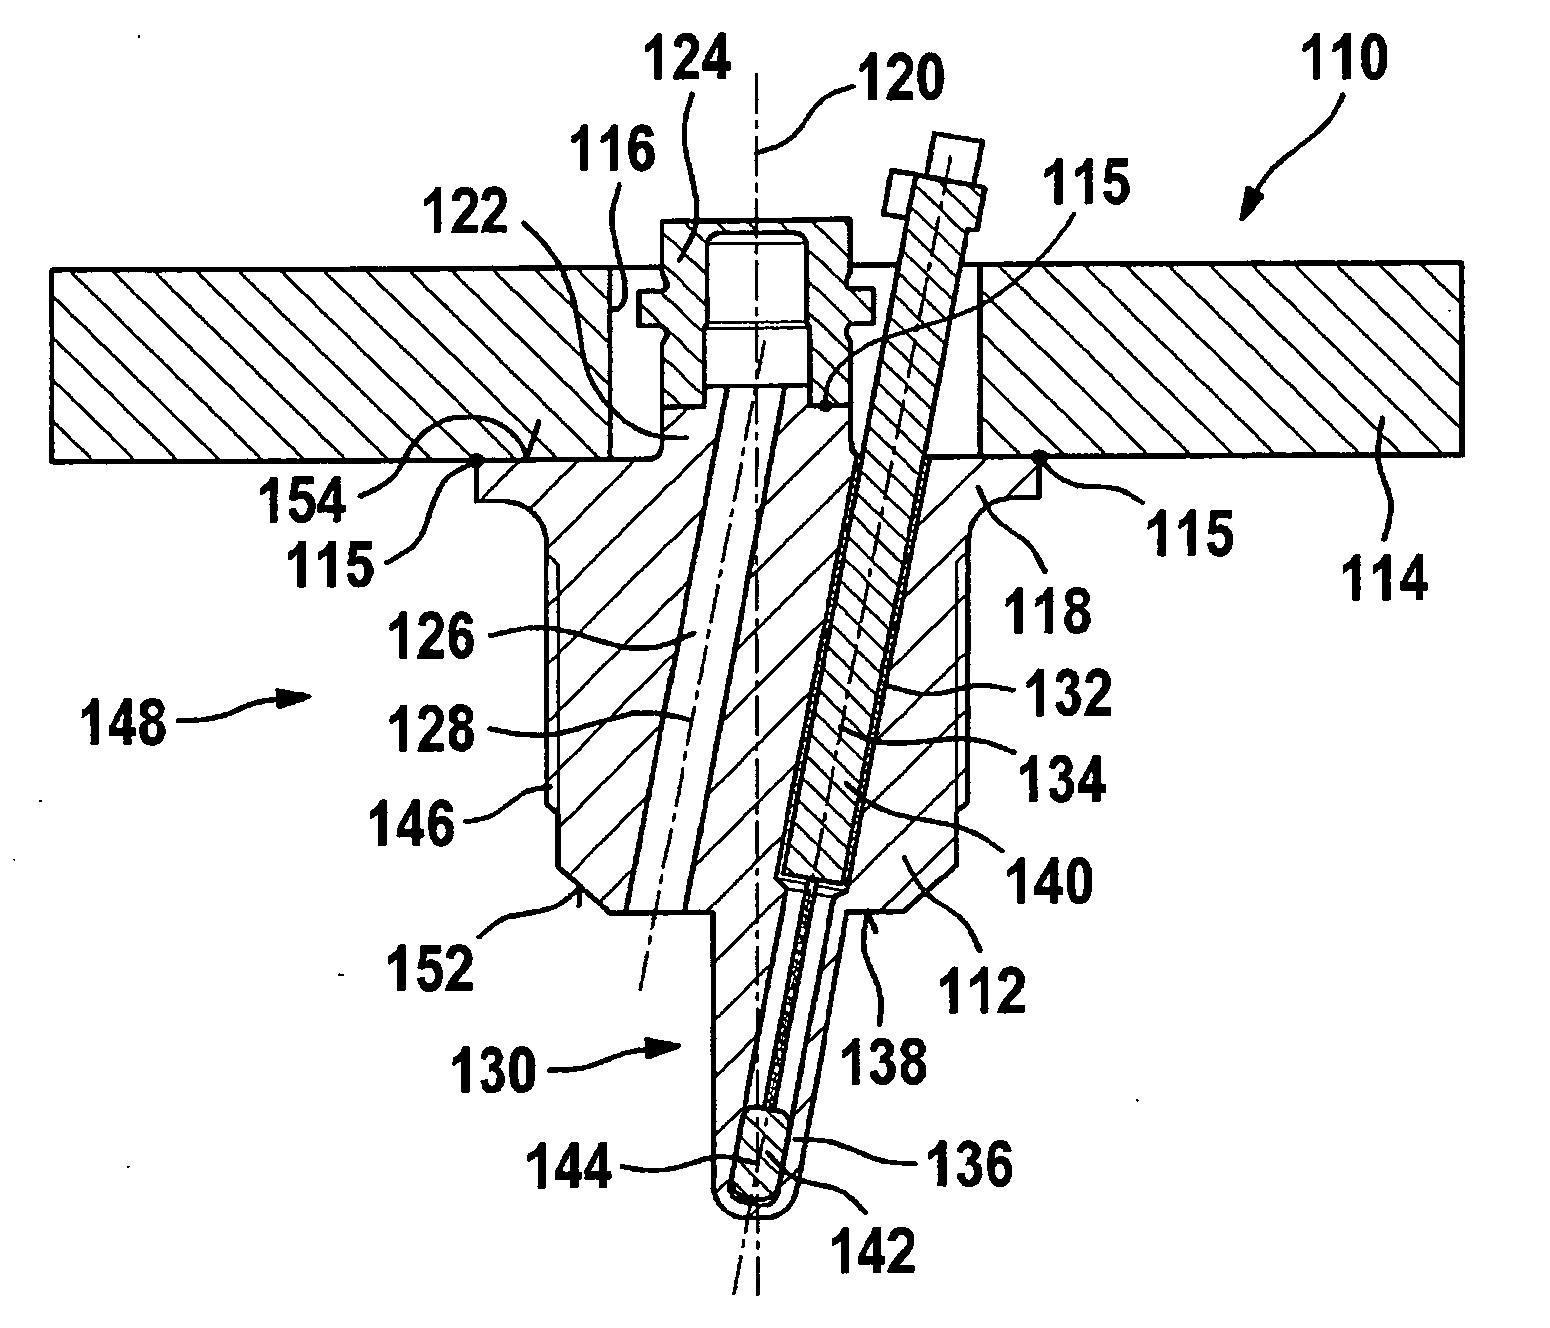 Plug-in sensor for measuring at least one property of a fluid medium